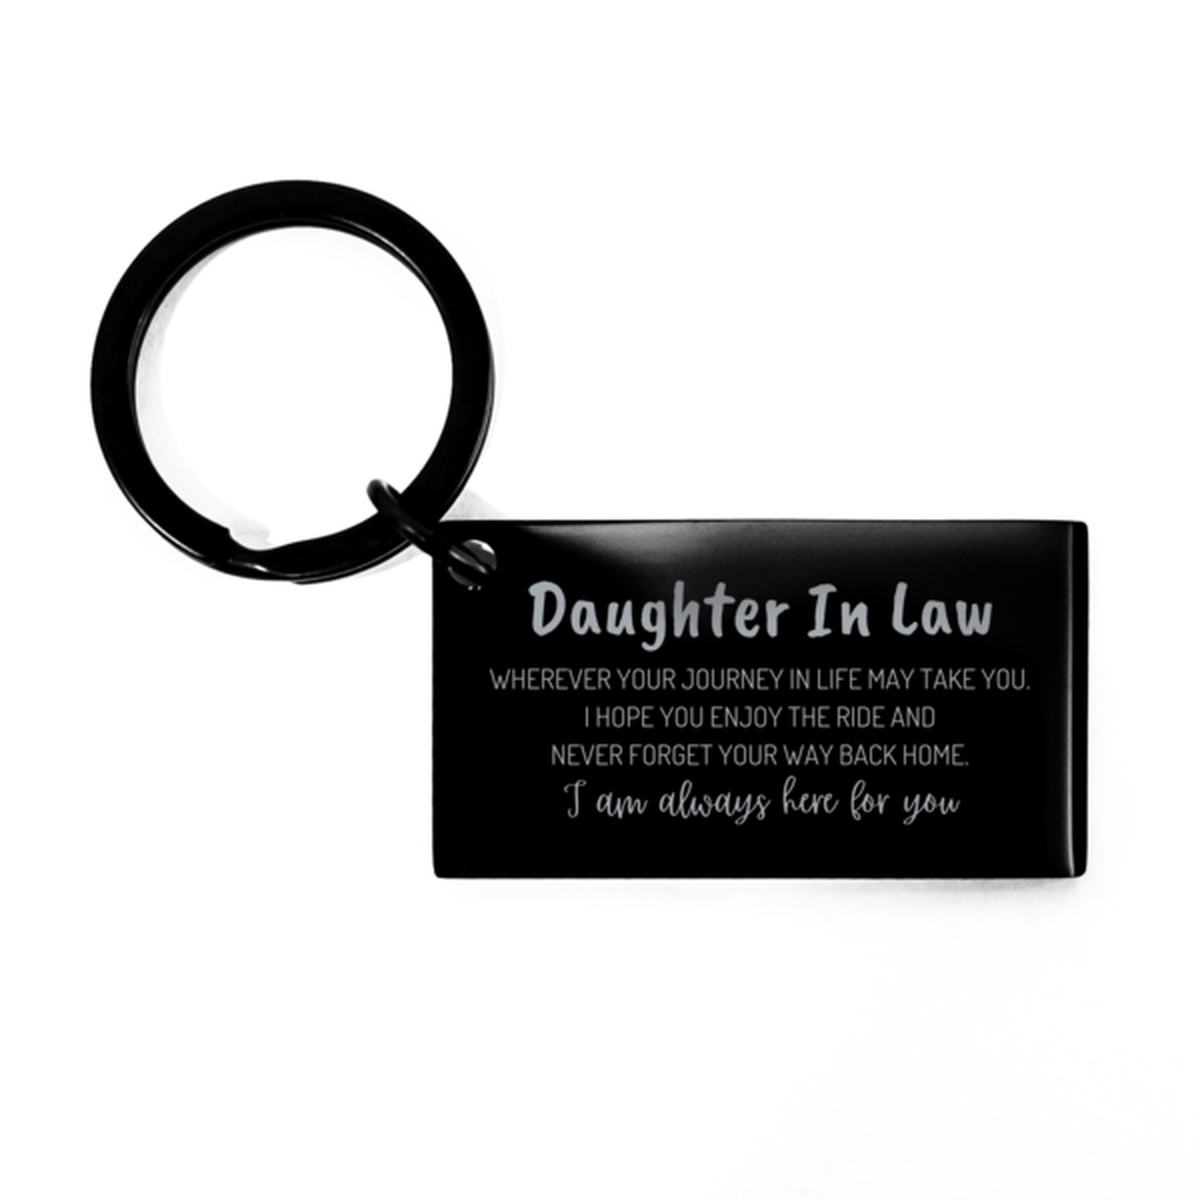 Daughter In Law wherever your journey in life may take you, I am always here for you Daughter In Law Keychain, Awesome Christmas Gifts For Daughter In Law, Daughter In Law Birthday Gifts for Men Women Family Loved One